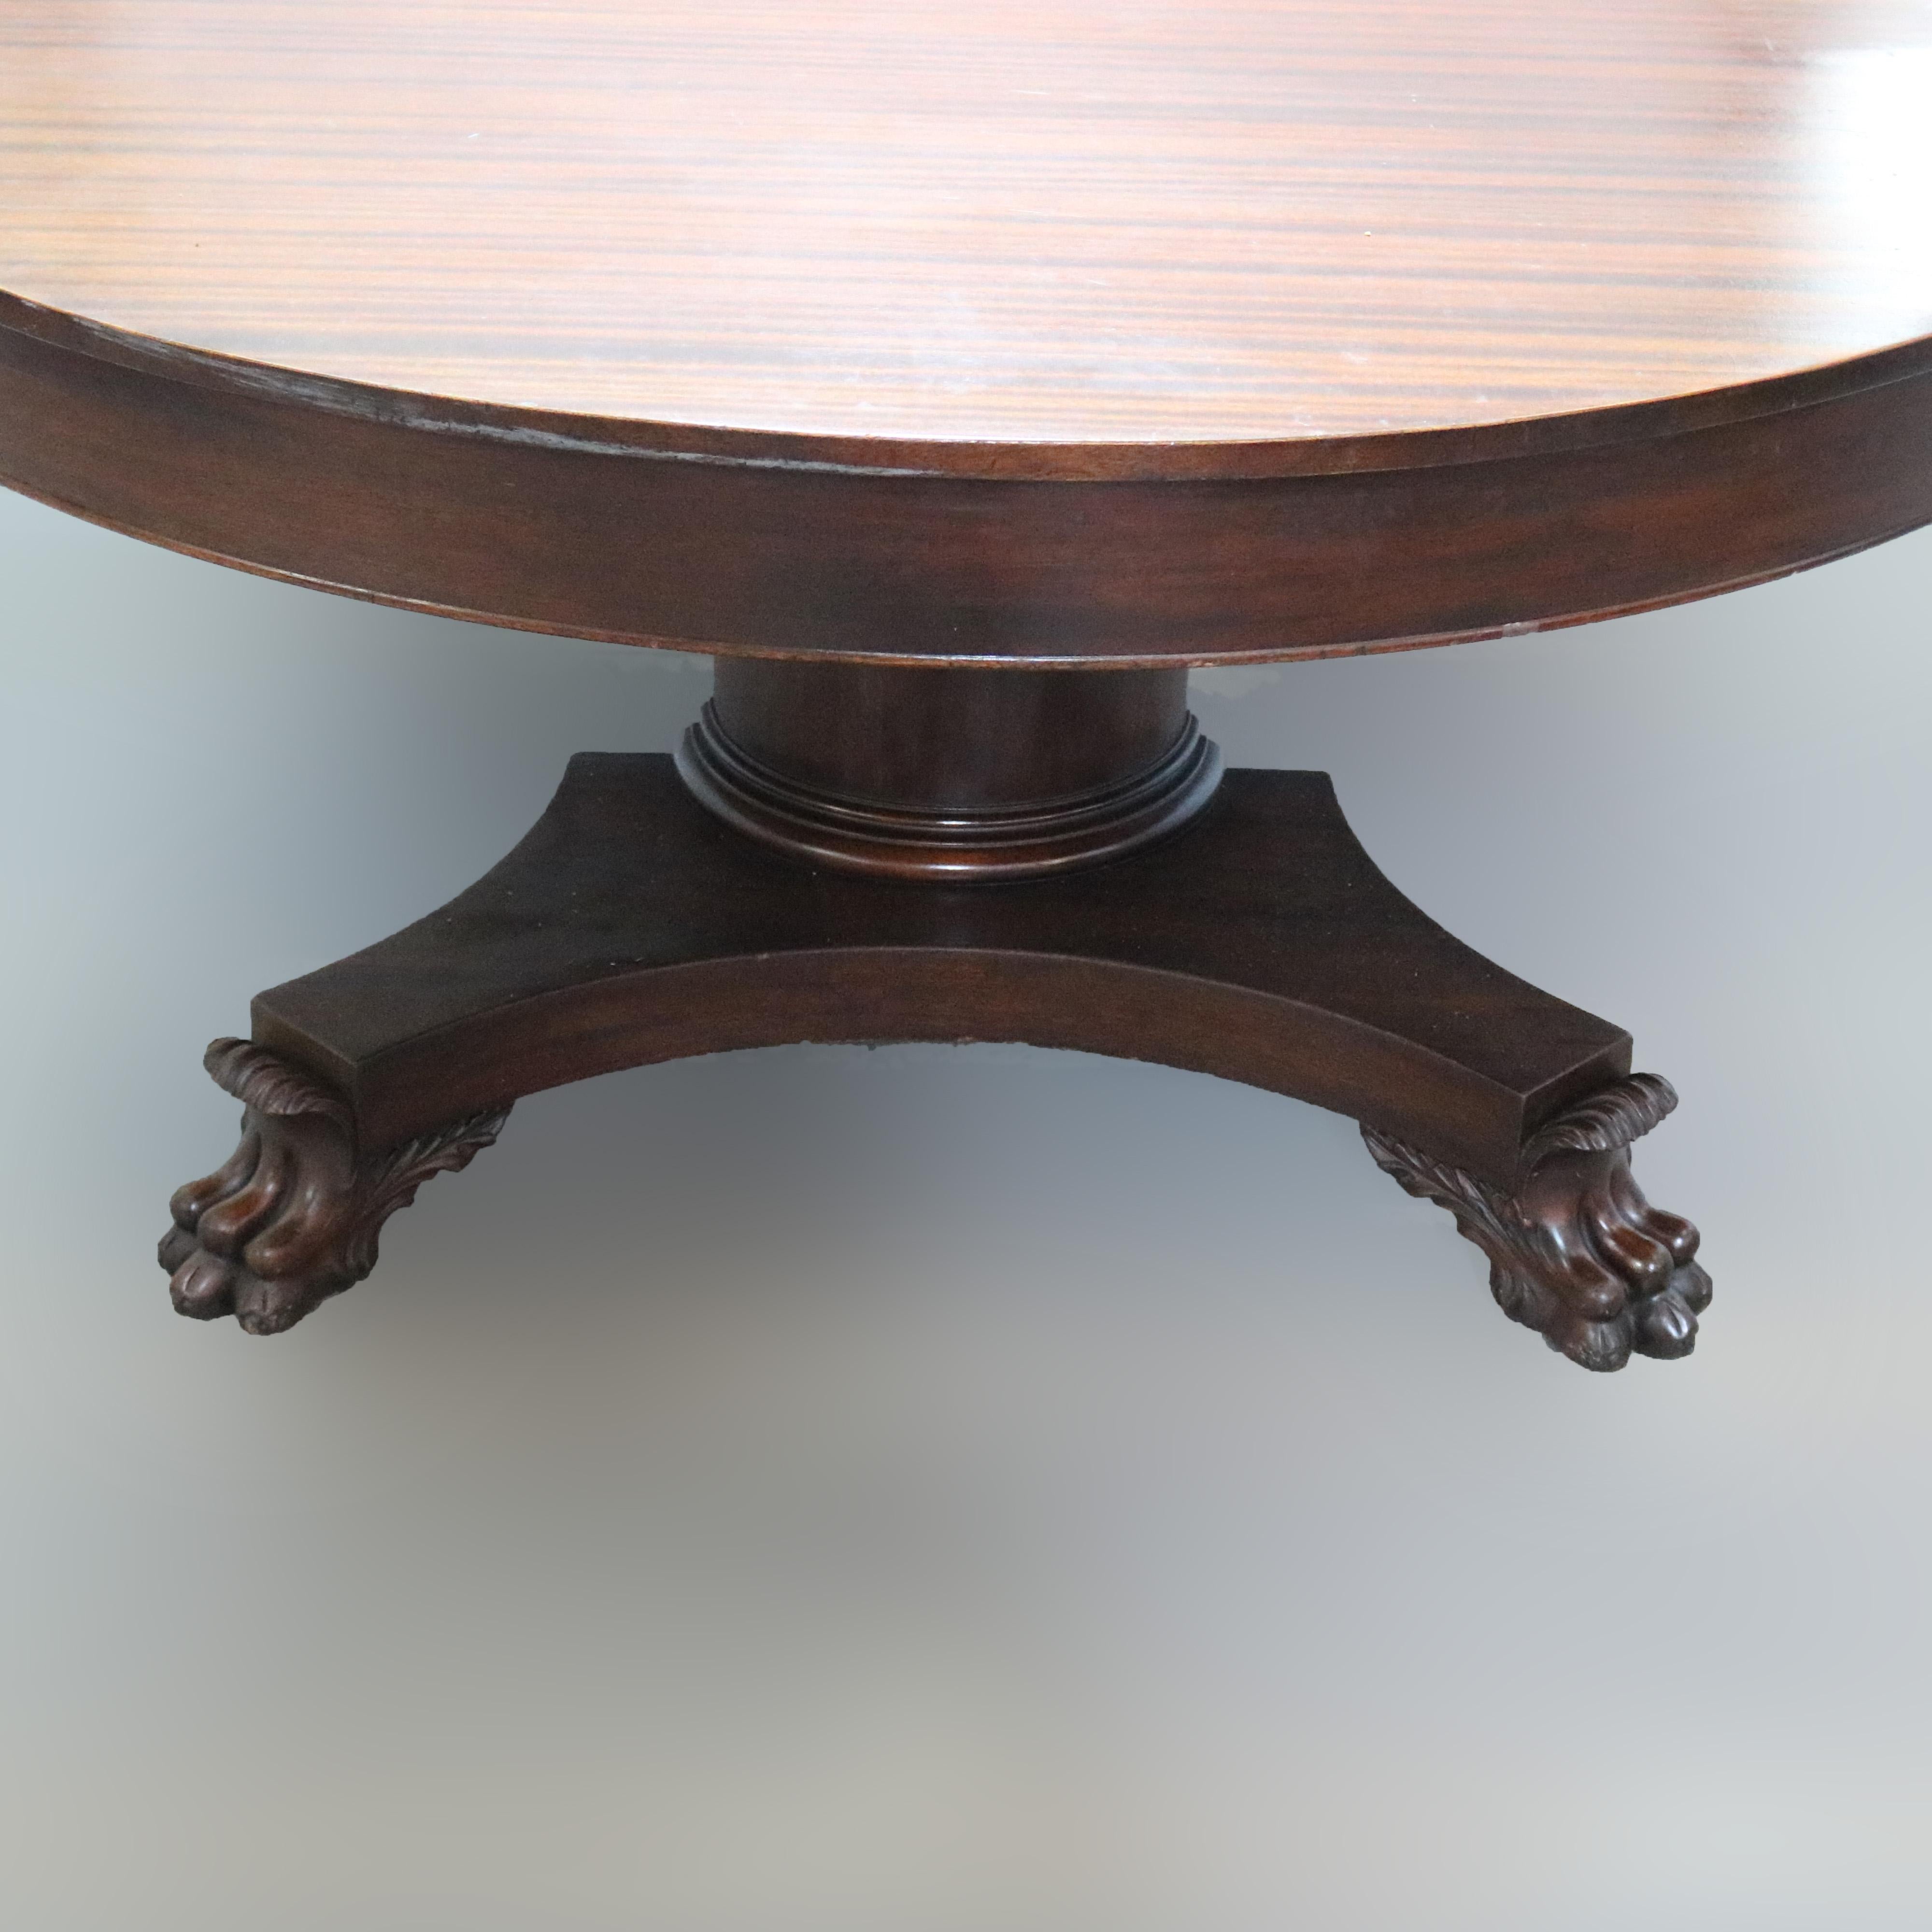 Carved American Empire Oversized Mahogany Split Pedestal Banquet Table, 8 Leaves